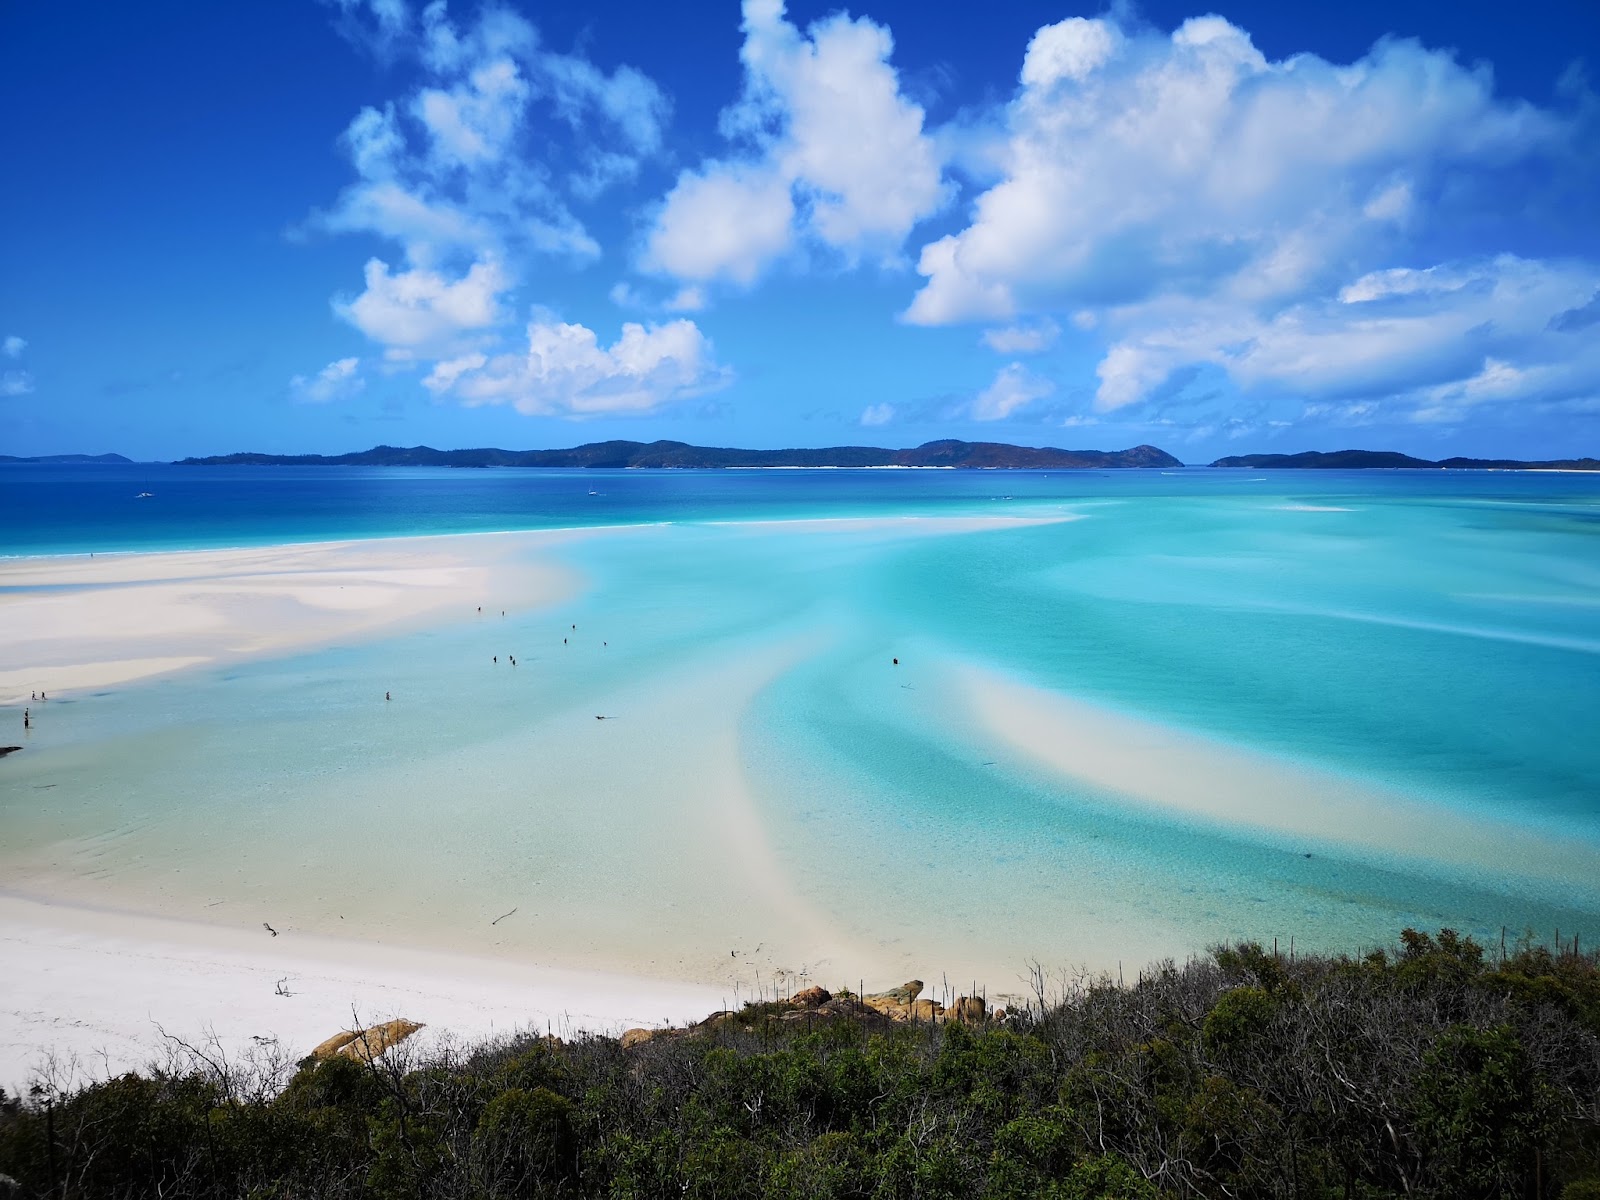 Crystal clear turquoise waters of the Whitsunday Islands, Australia.